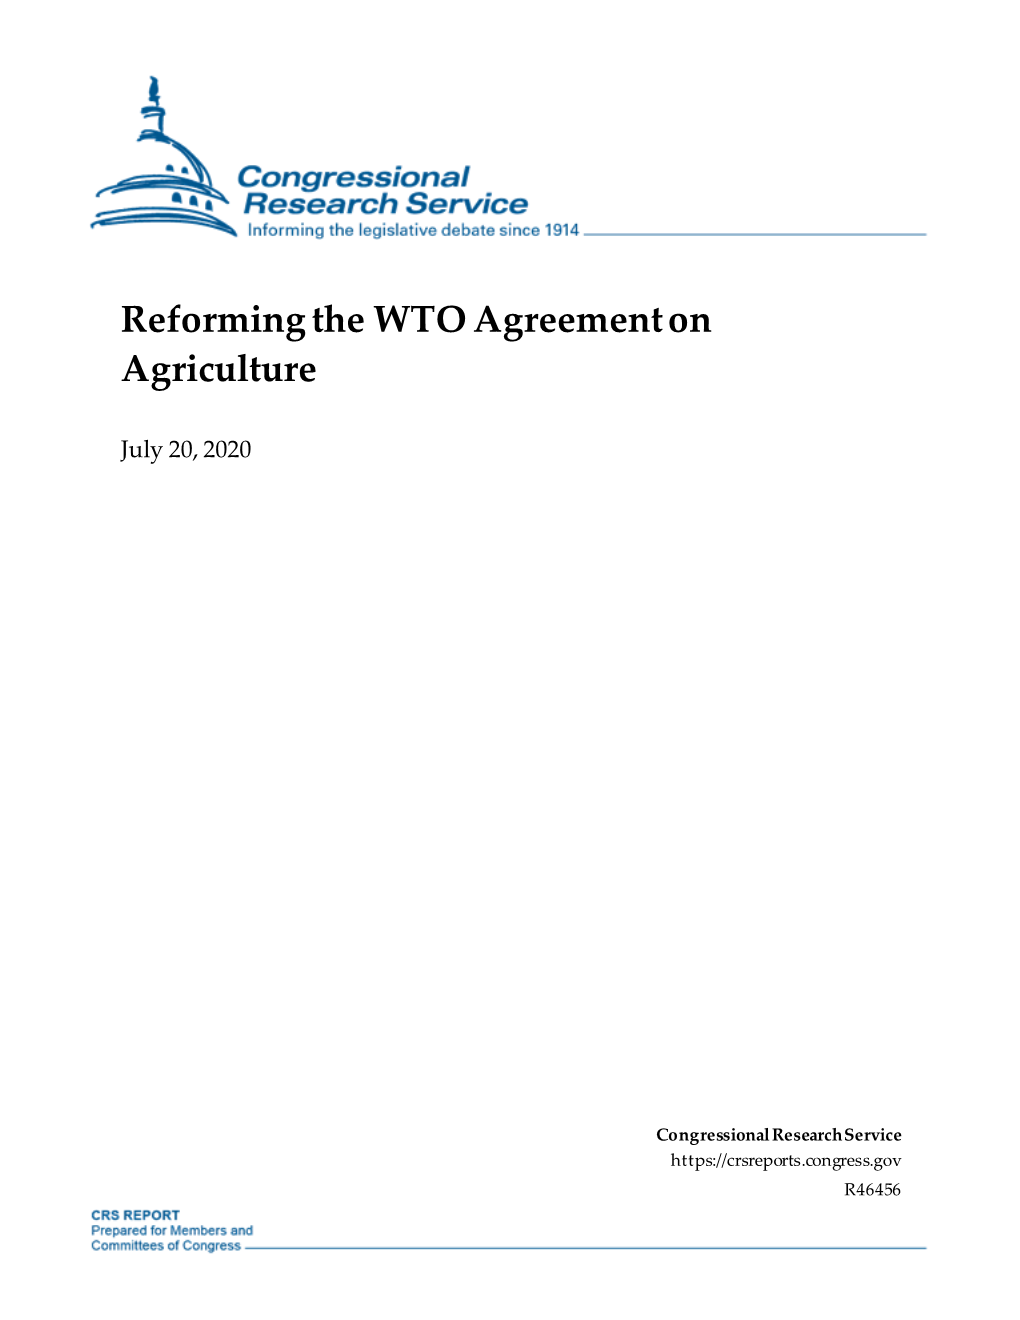 Reforming the WTO Agreement on Agriculture